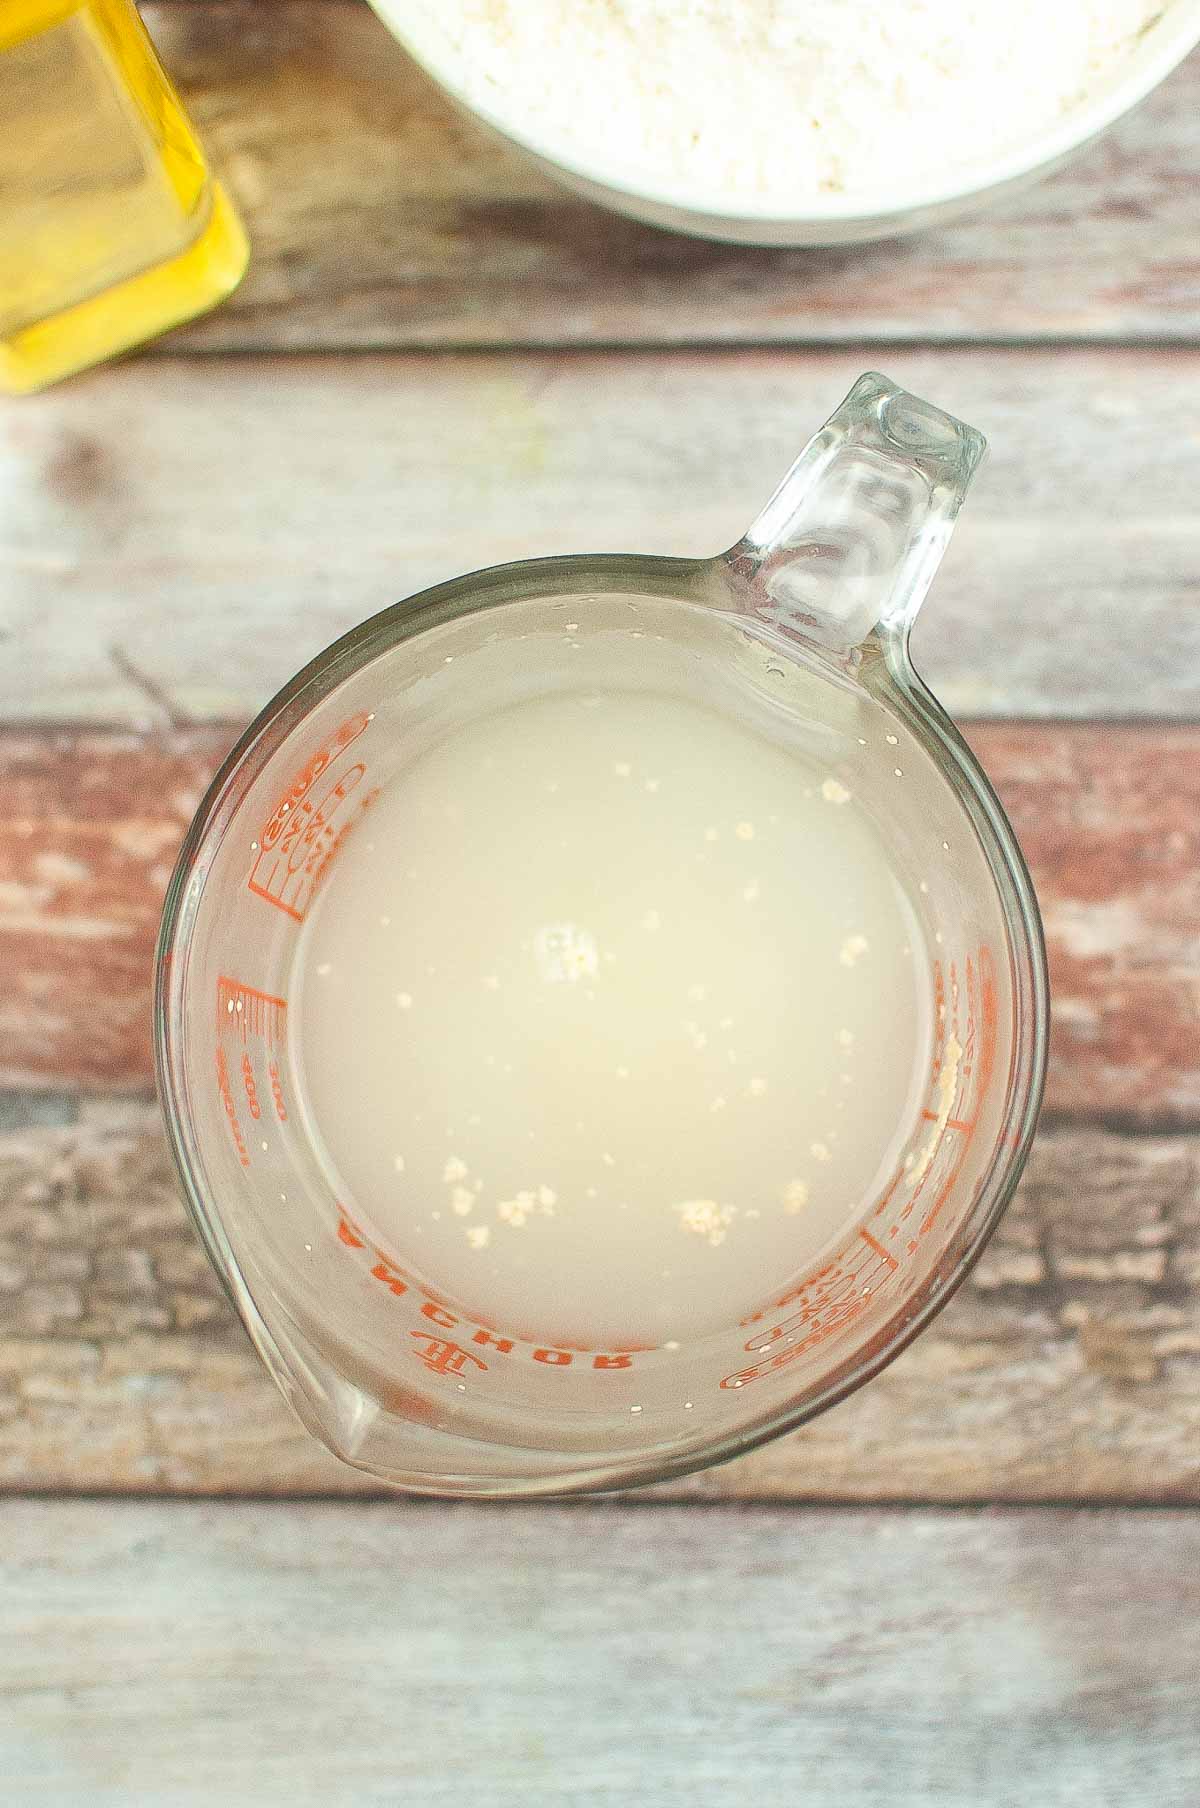 Yeast, sugar, and warm water in a container